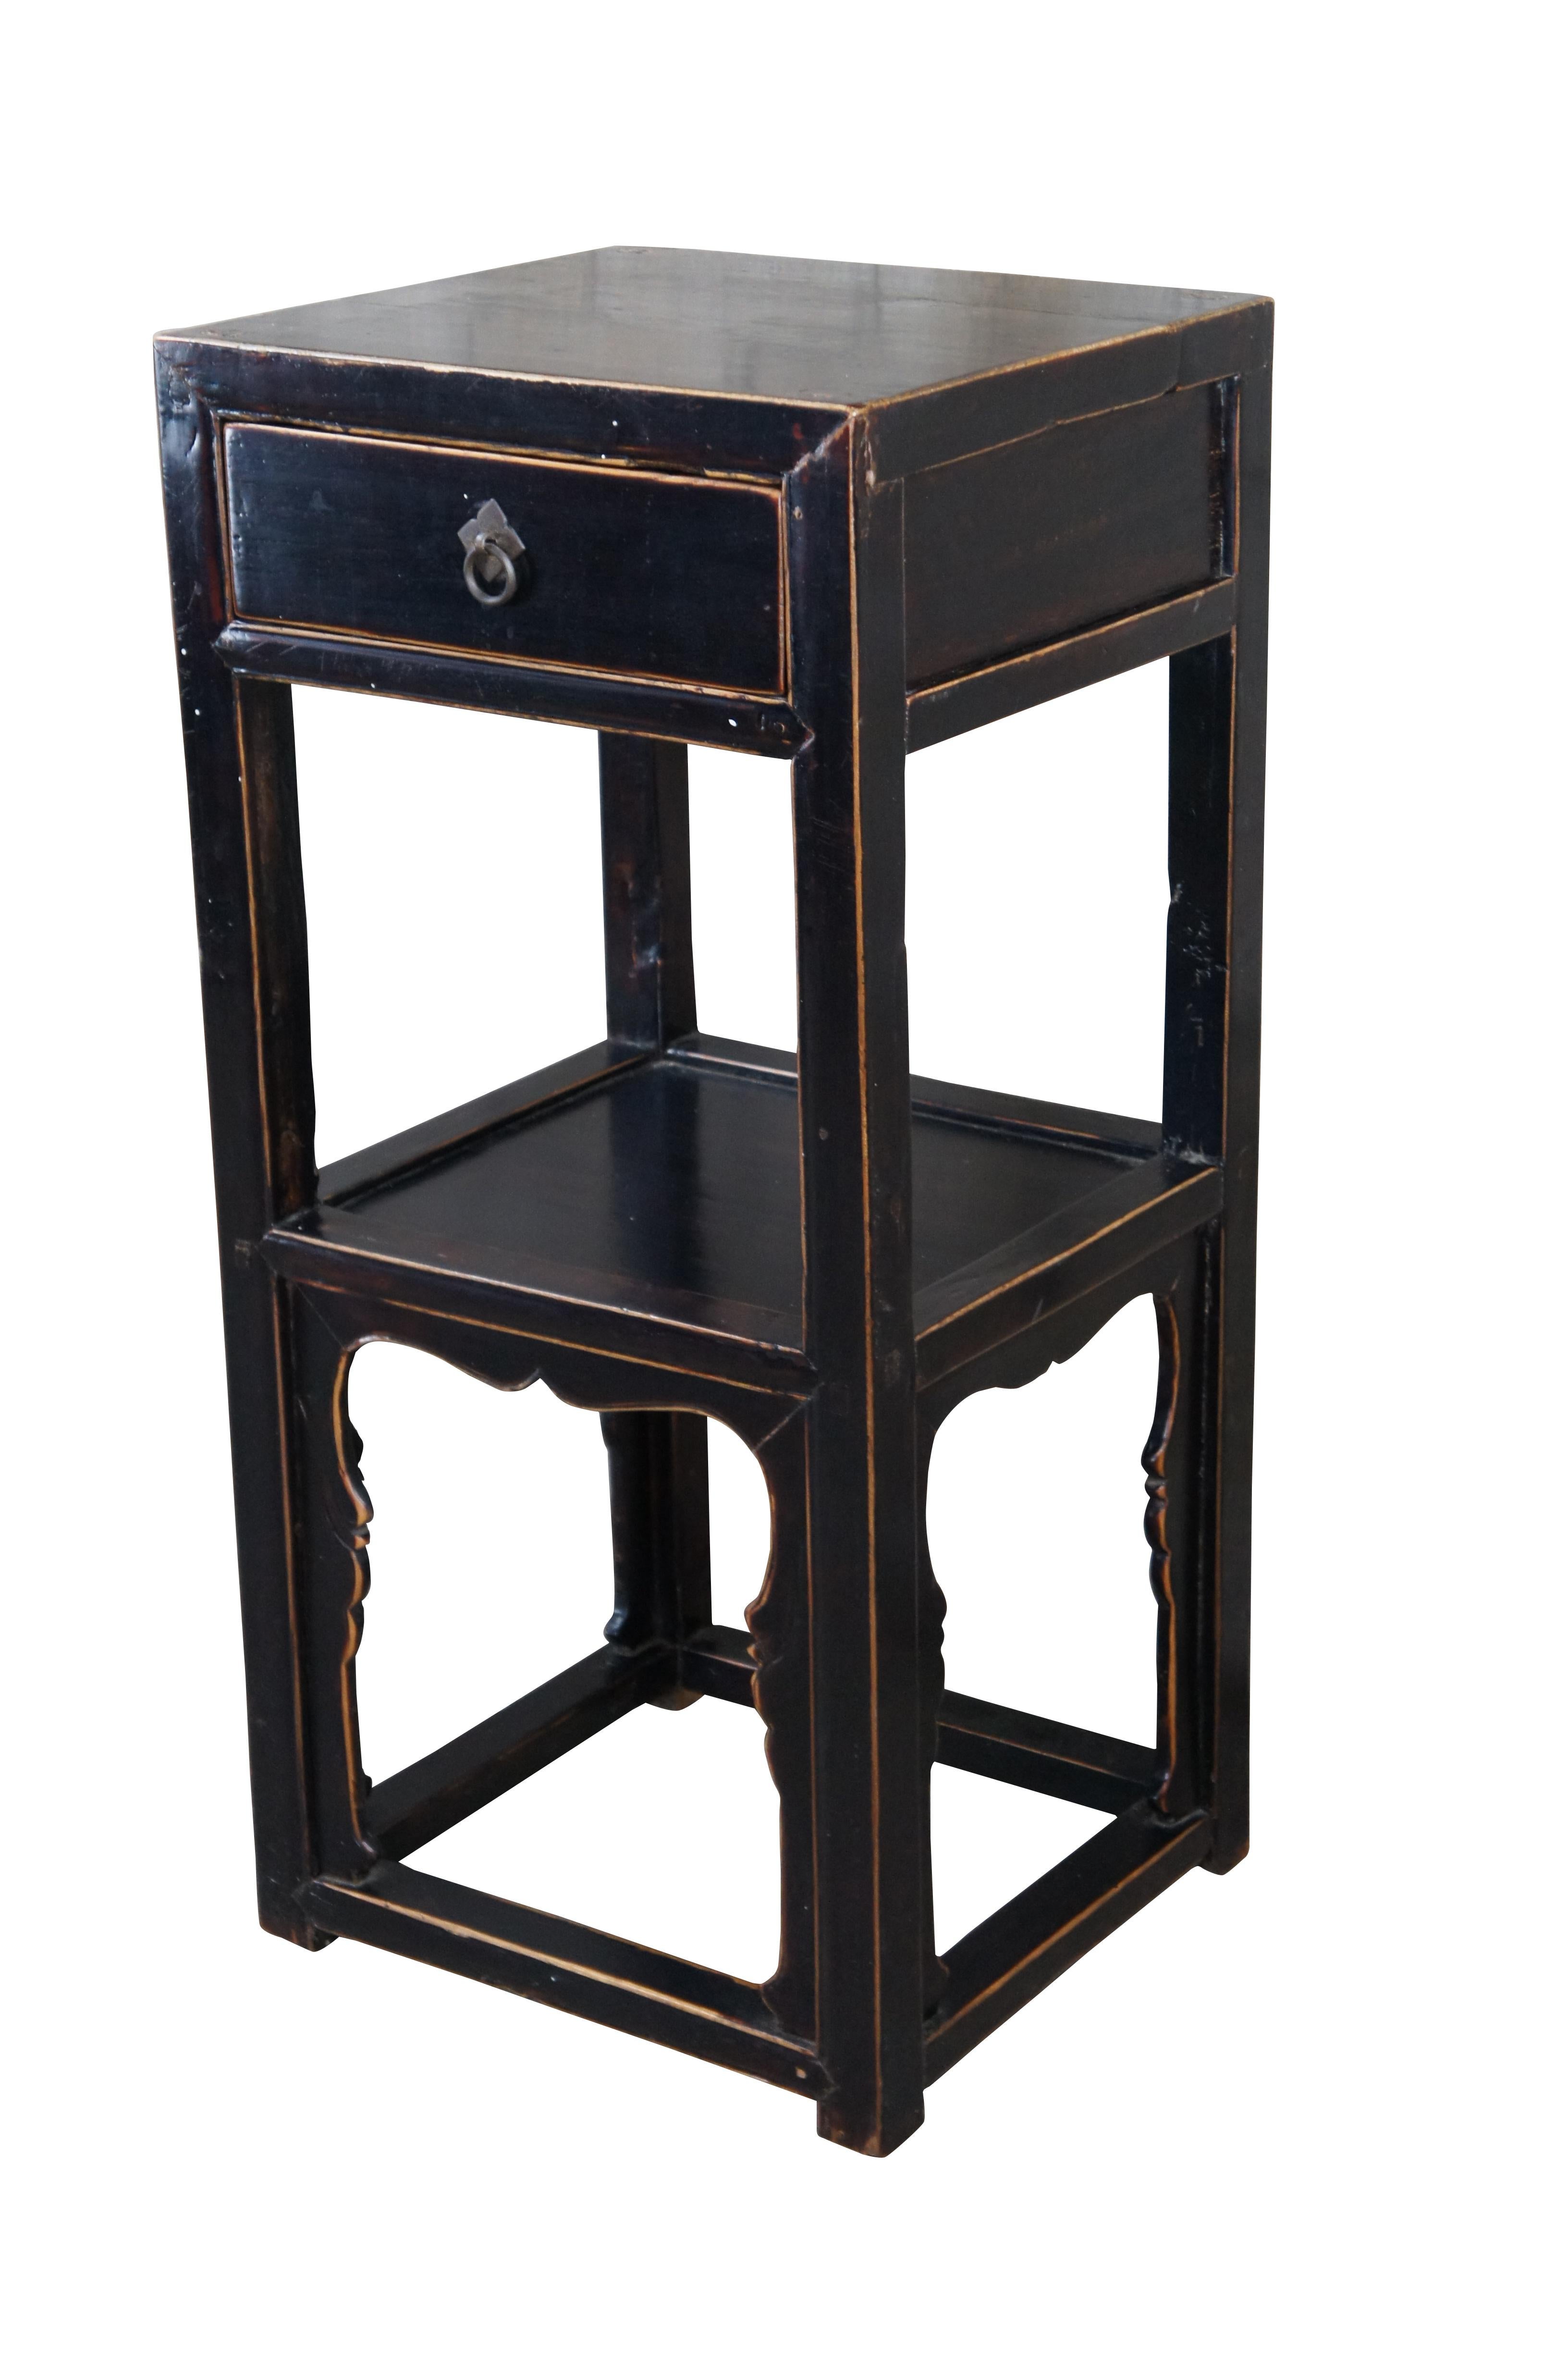 Antique Chinese Qing Dynasty Black Lacquer Elm Tiered Side Table Pedestal Stand In Good Condition For Sale In Dayton, OH